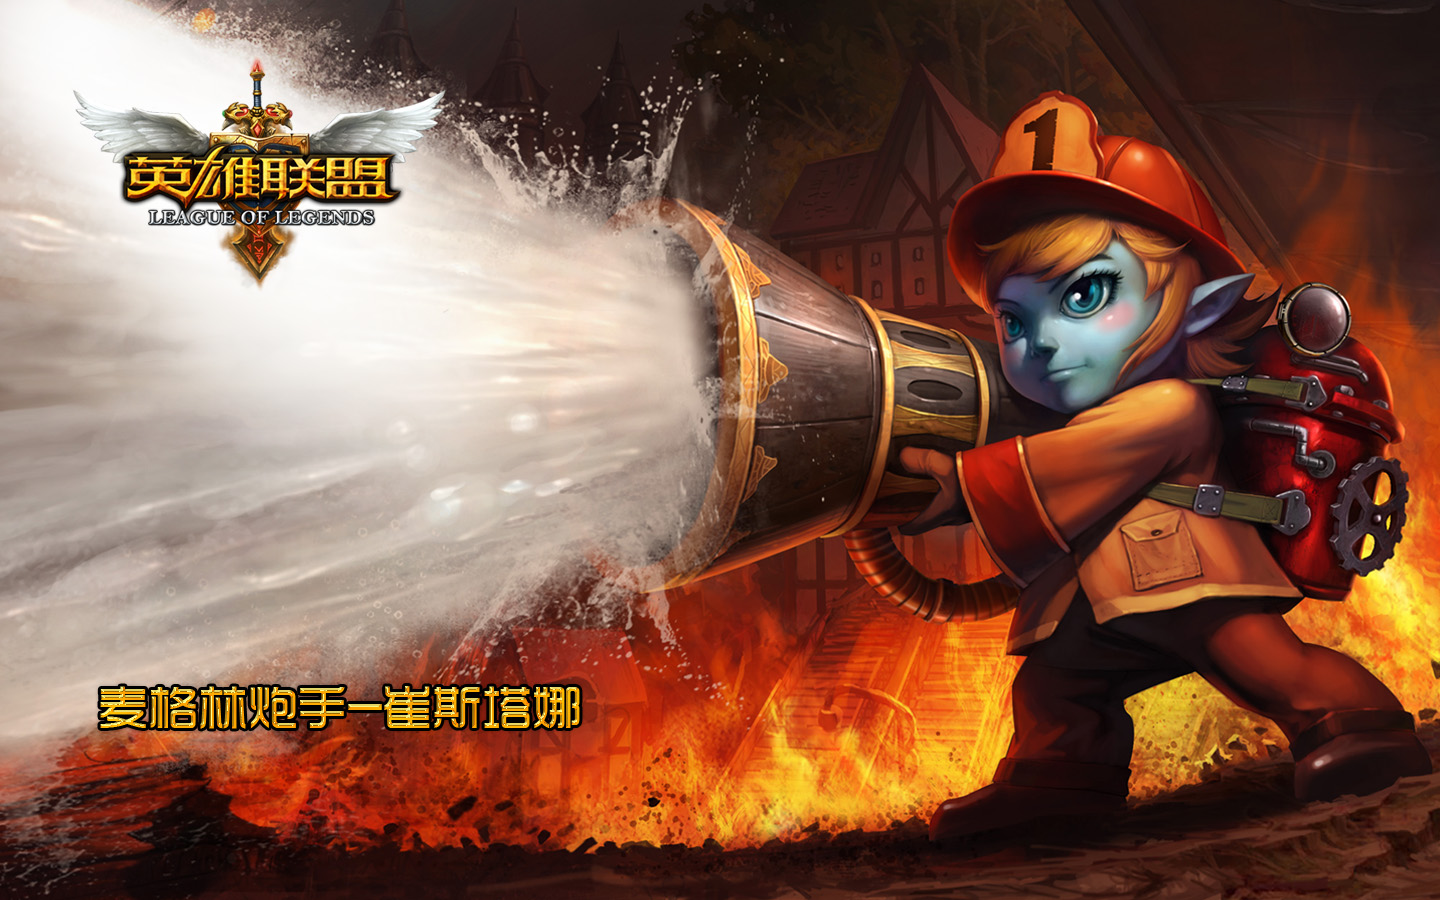 League Of Legends Wallpaper Chinese Official Version Mmorpg News